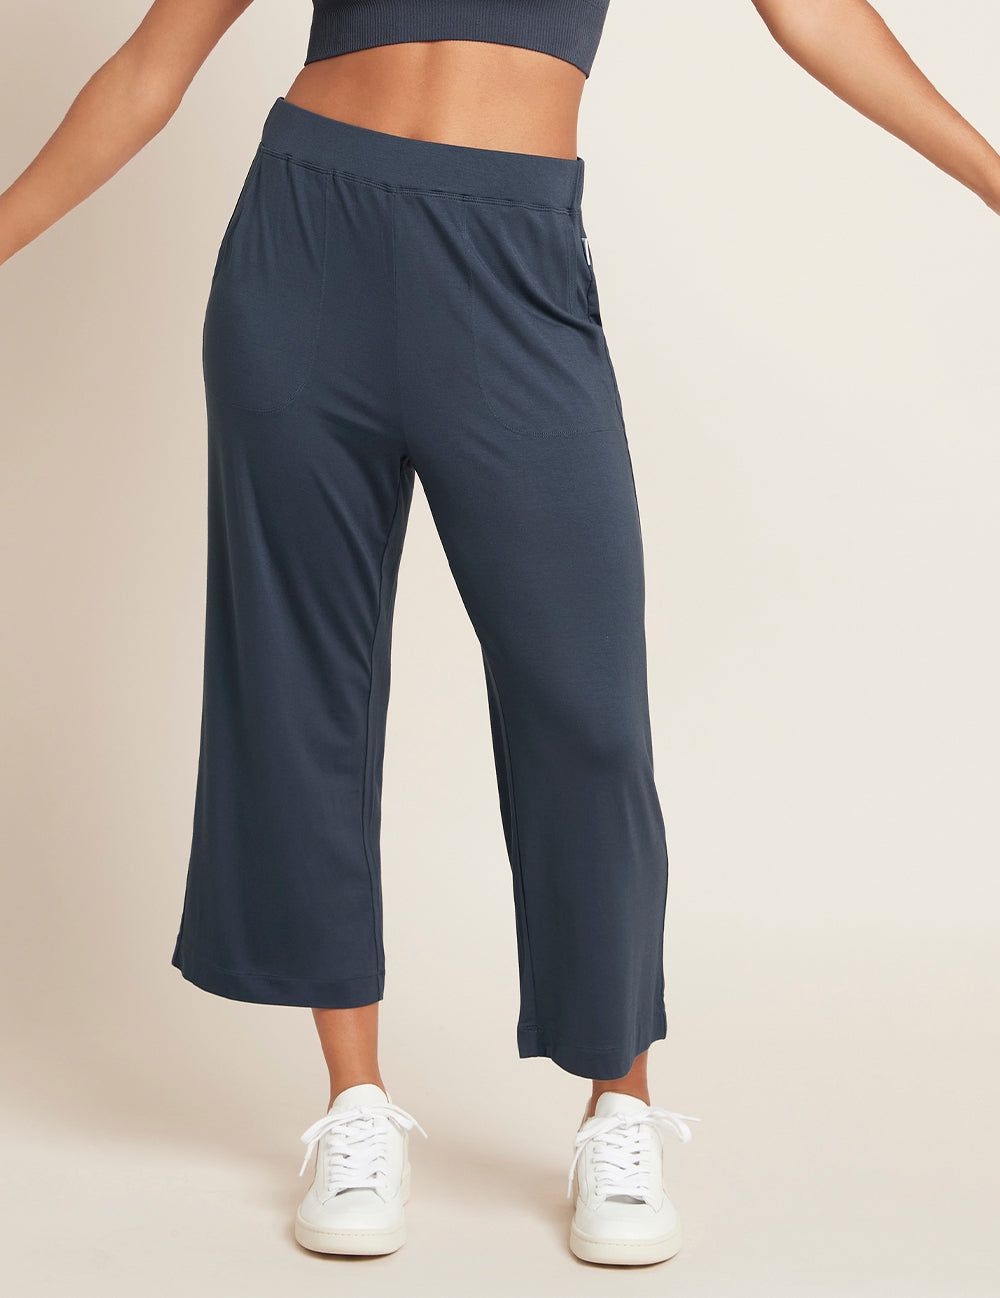 Downtime Crop Pant